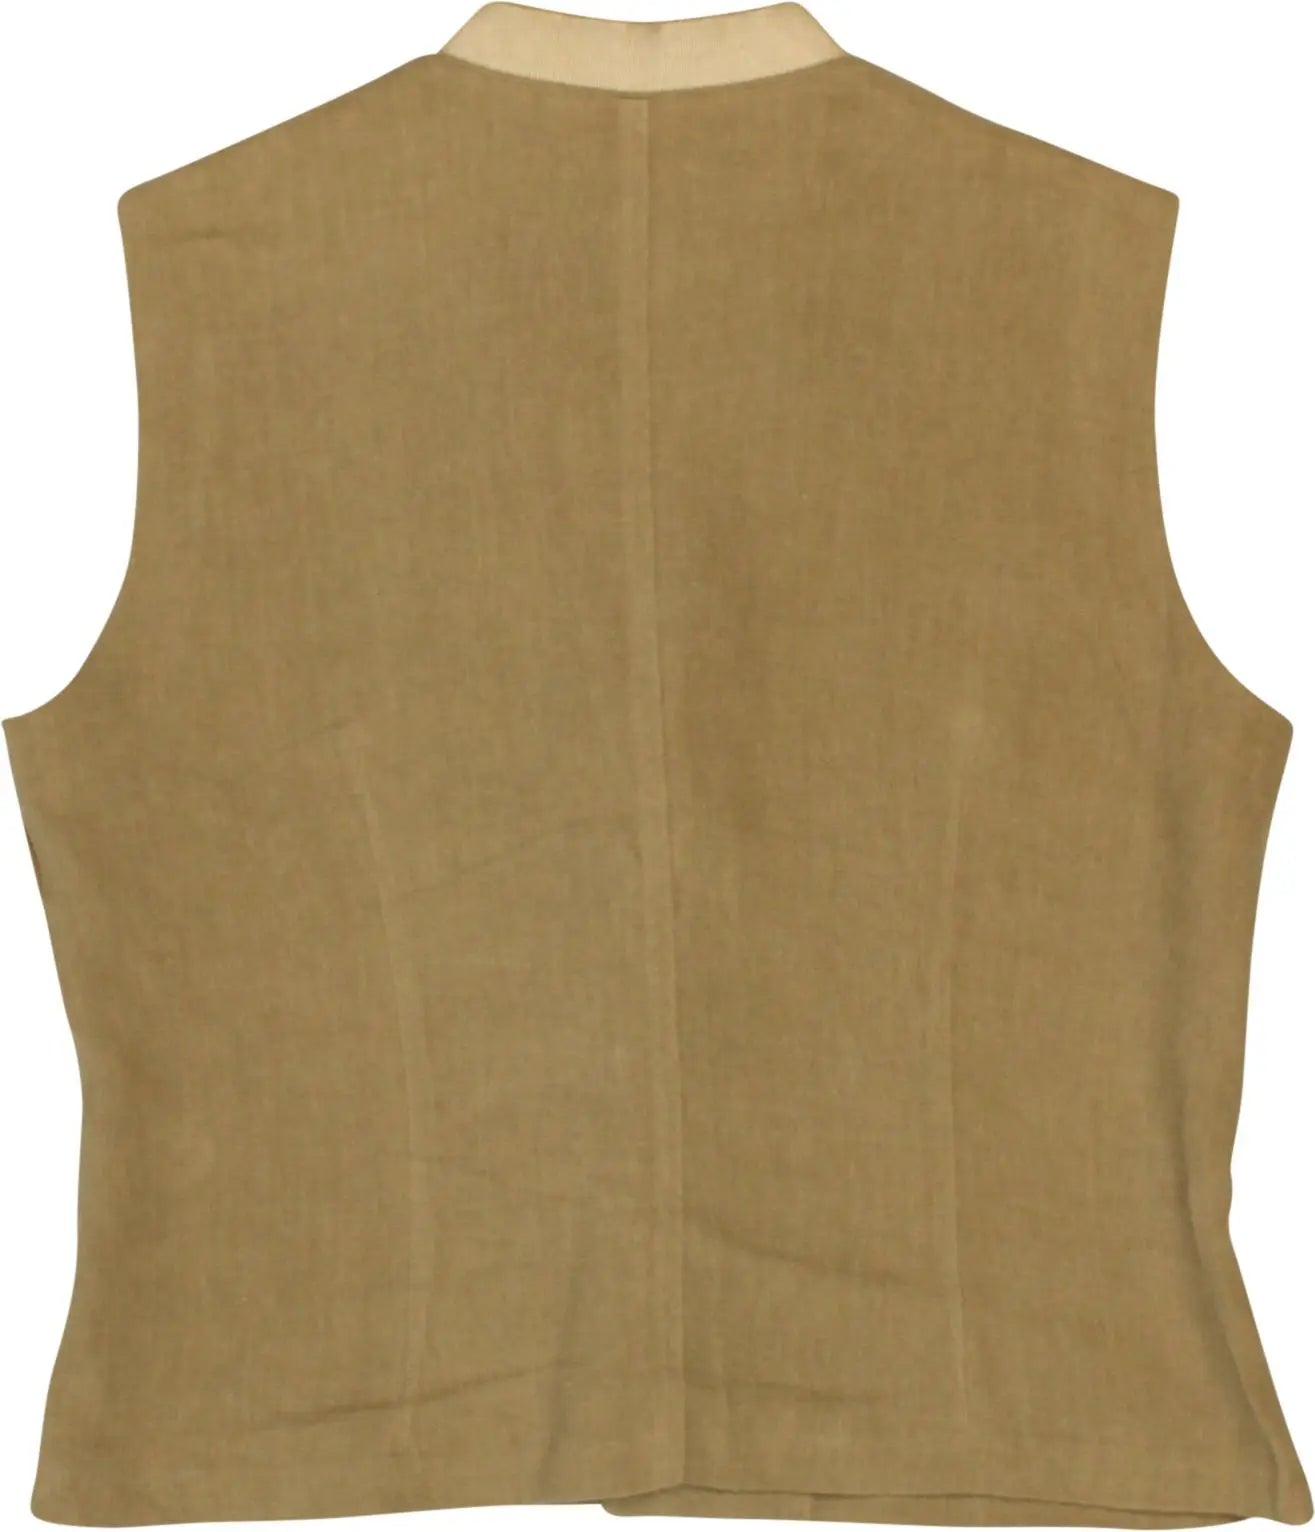 ML Collections - Linen Waistcoat- ThriftTale.com - Vintage and second handclothing